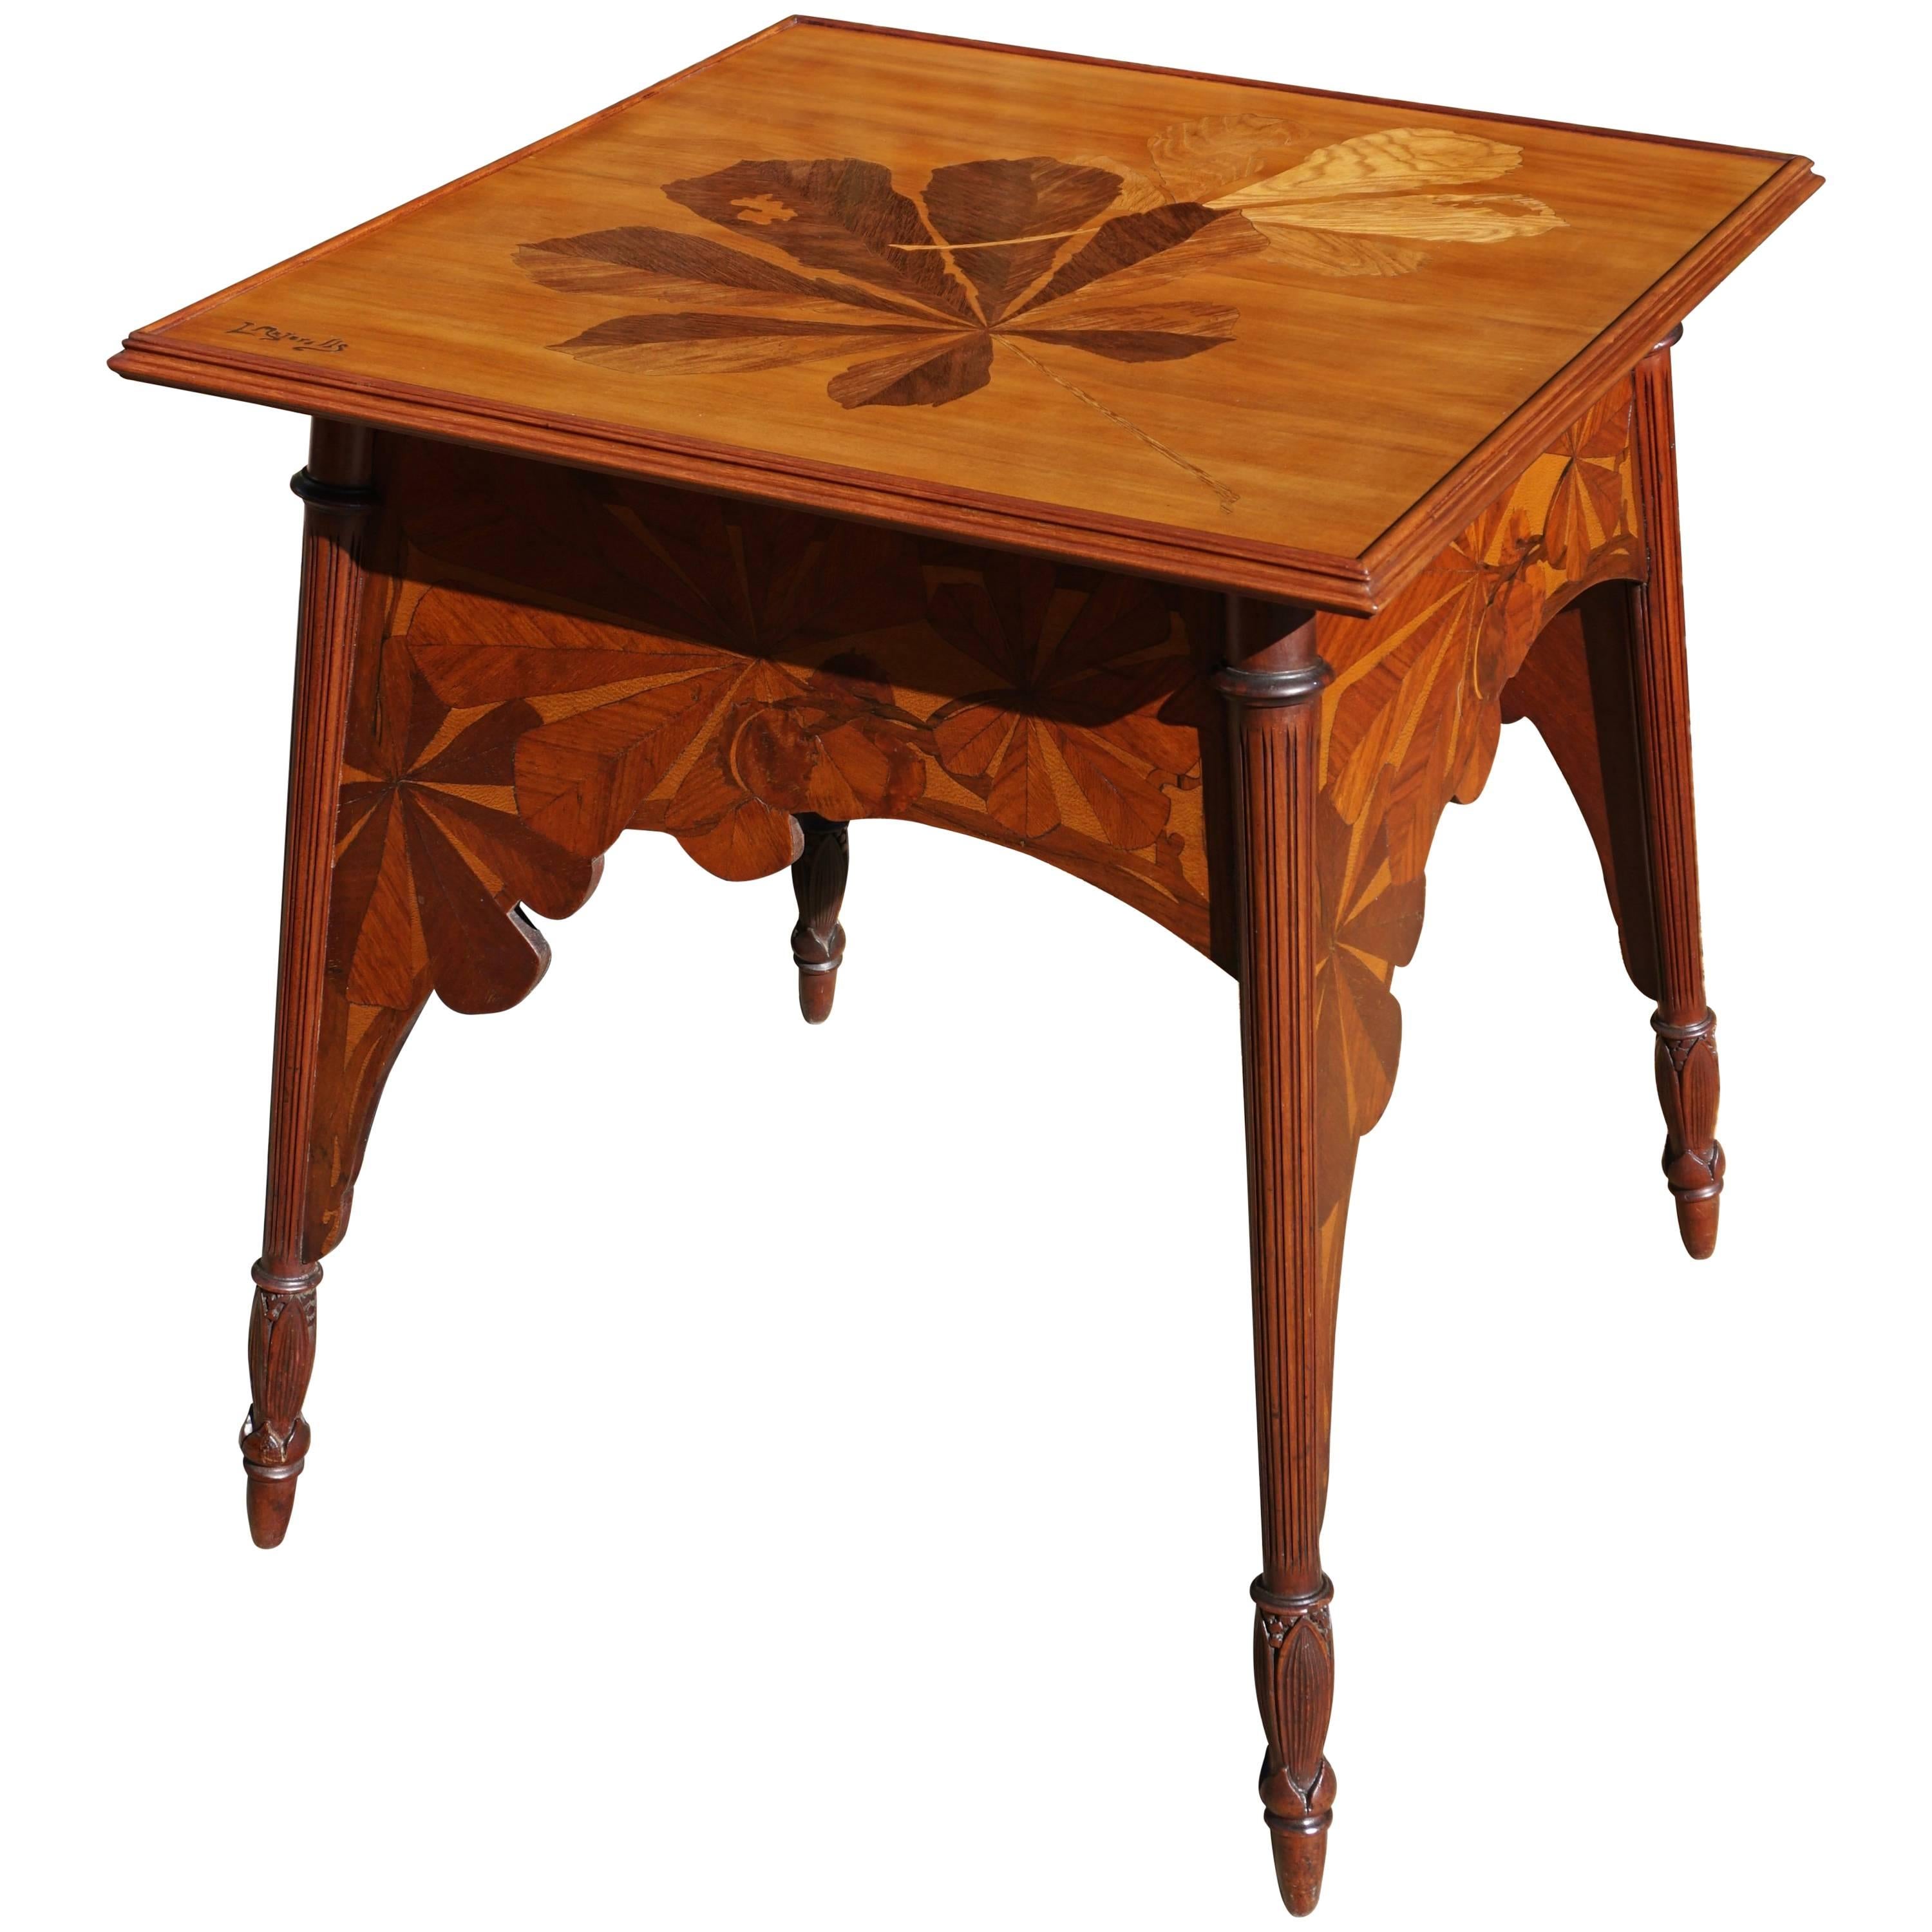 Louis Majorelle Signed French Art Nouveau Game Table, circa 1900 For Sale